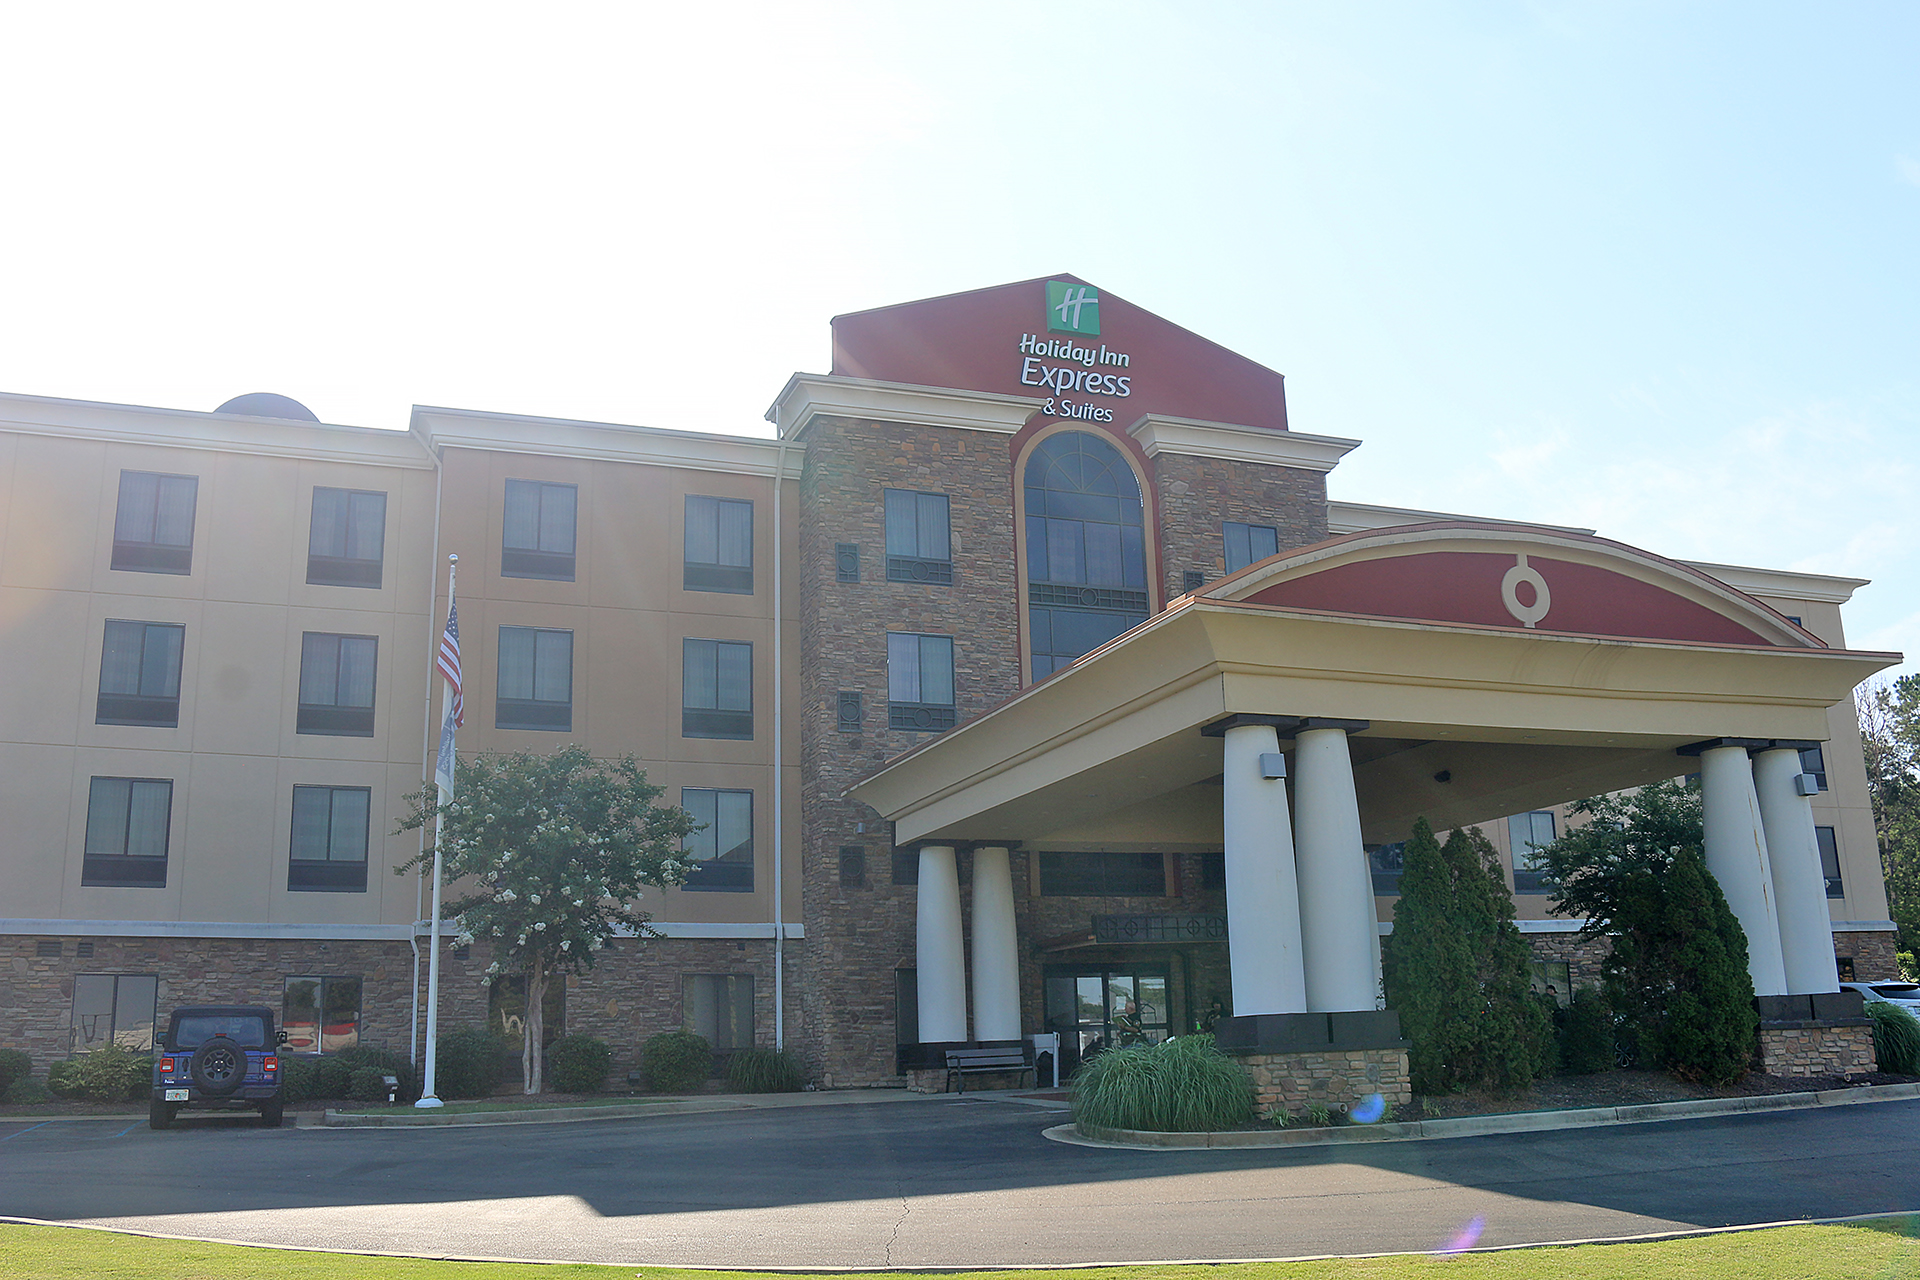 Holiday Inn Express & Suites Fulton Mississippi